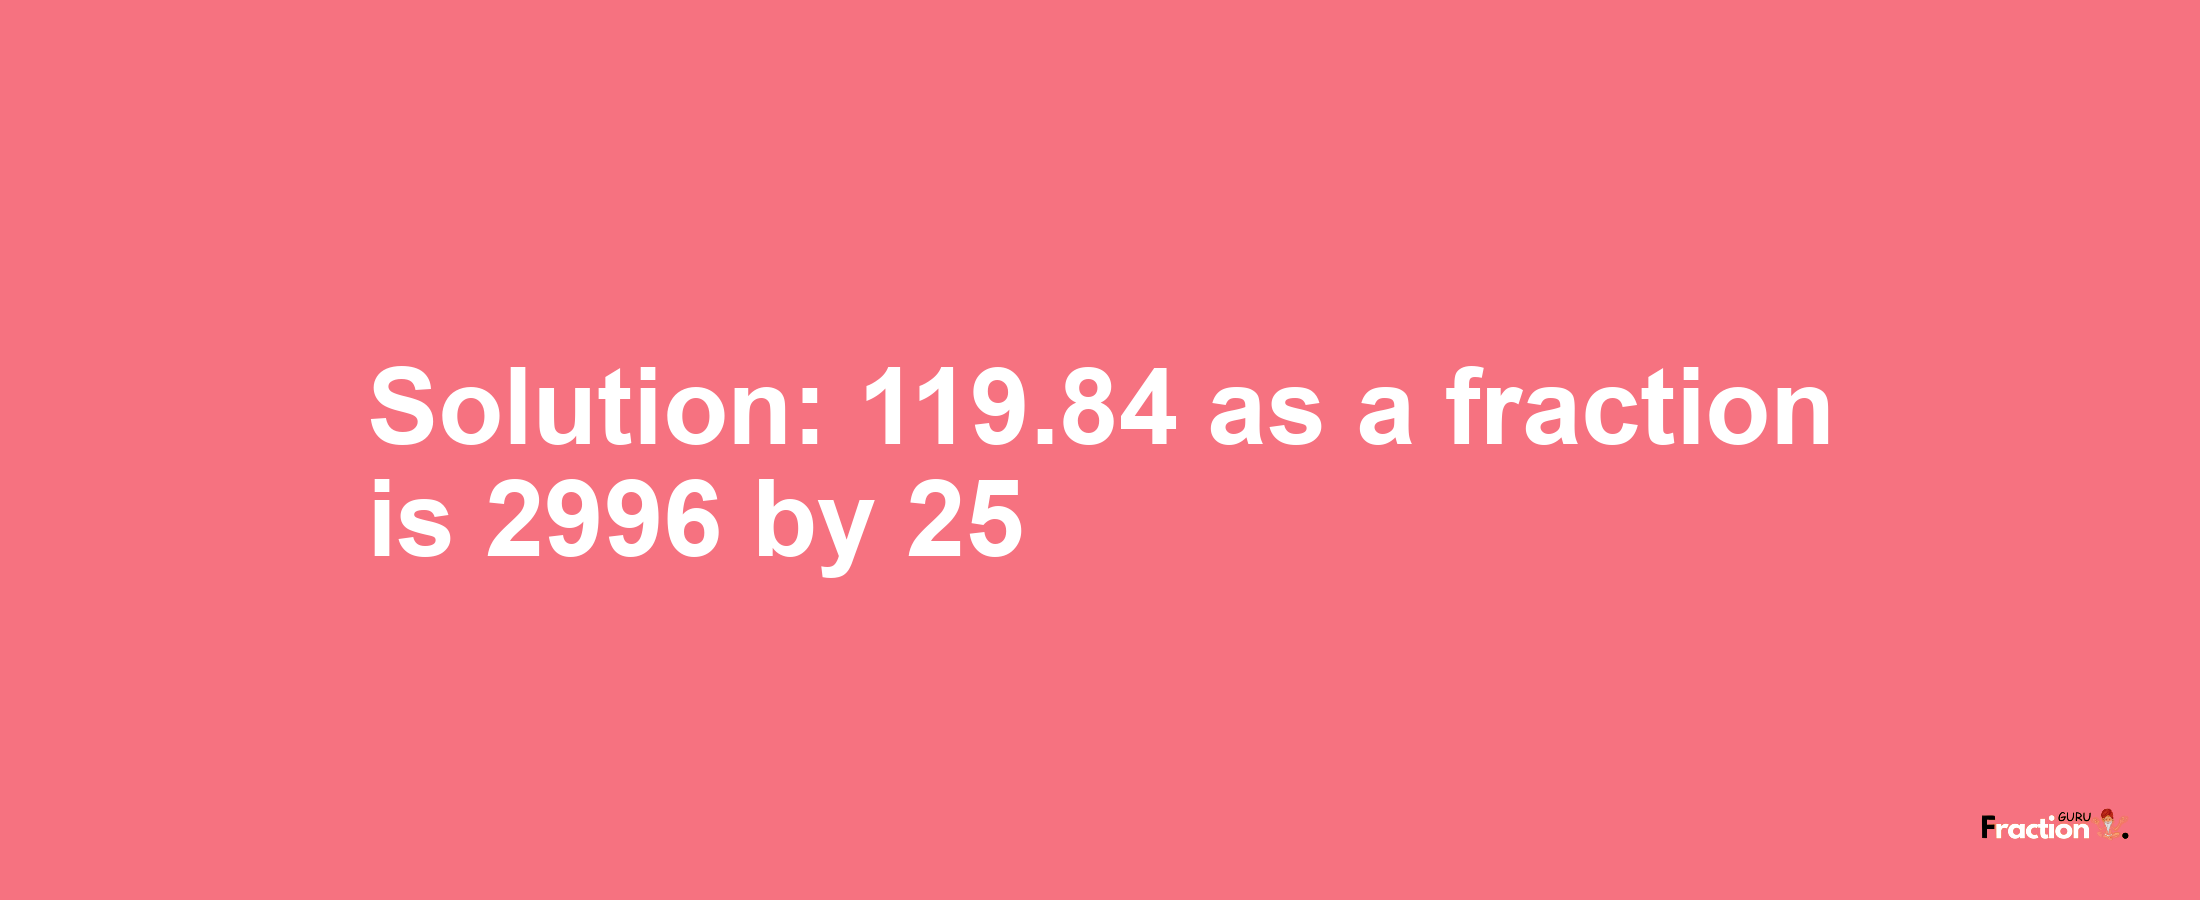 Solution:119.84 as a fraction is 2996/25